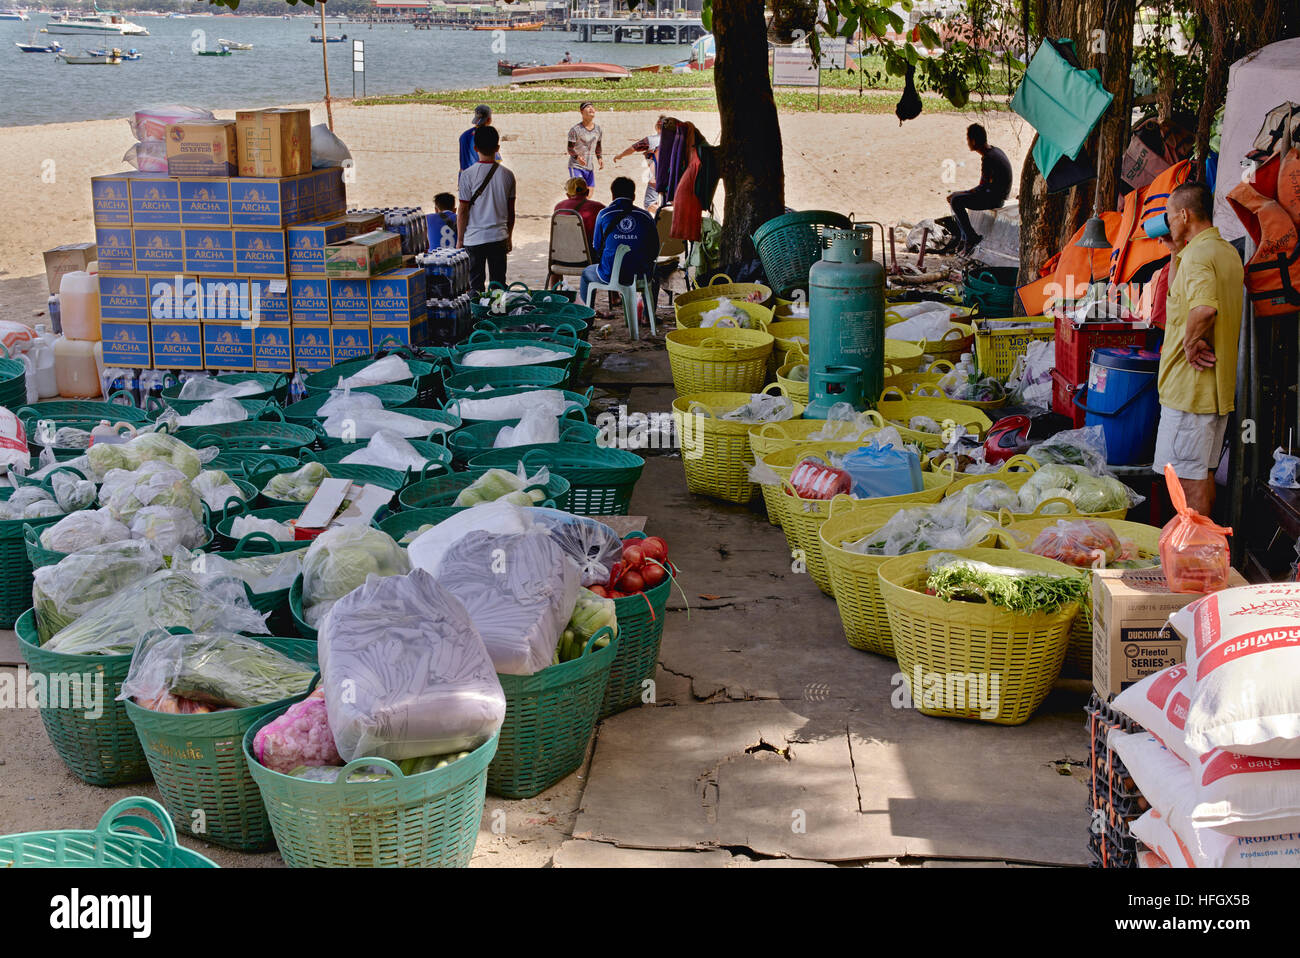 Baskets of food supplies on a Thai beach awaiting delivery by boat. Thailand S. E. Asia Stock Photo